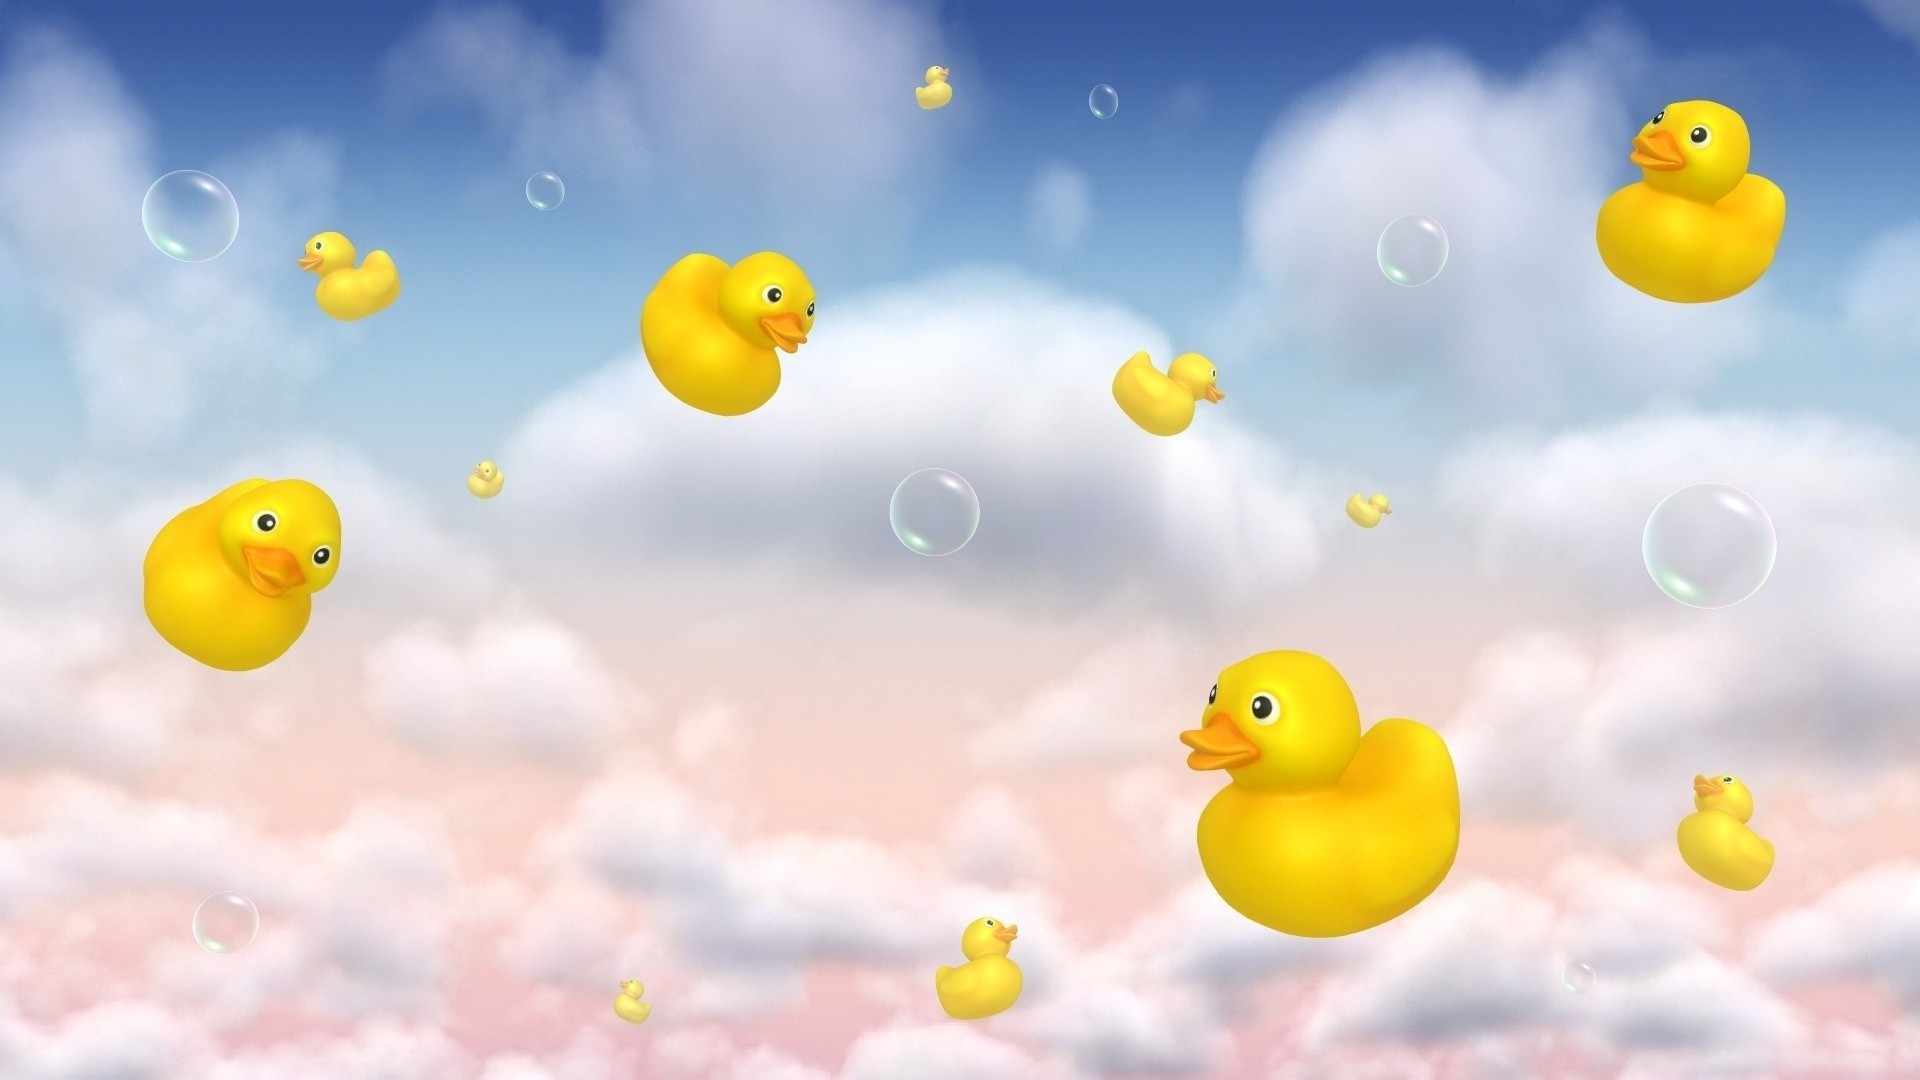 1920x1080 Floating rubber ducks and bubbles HD Wallpaper 